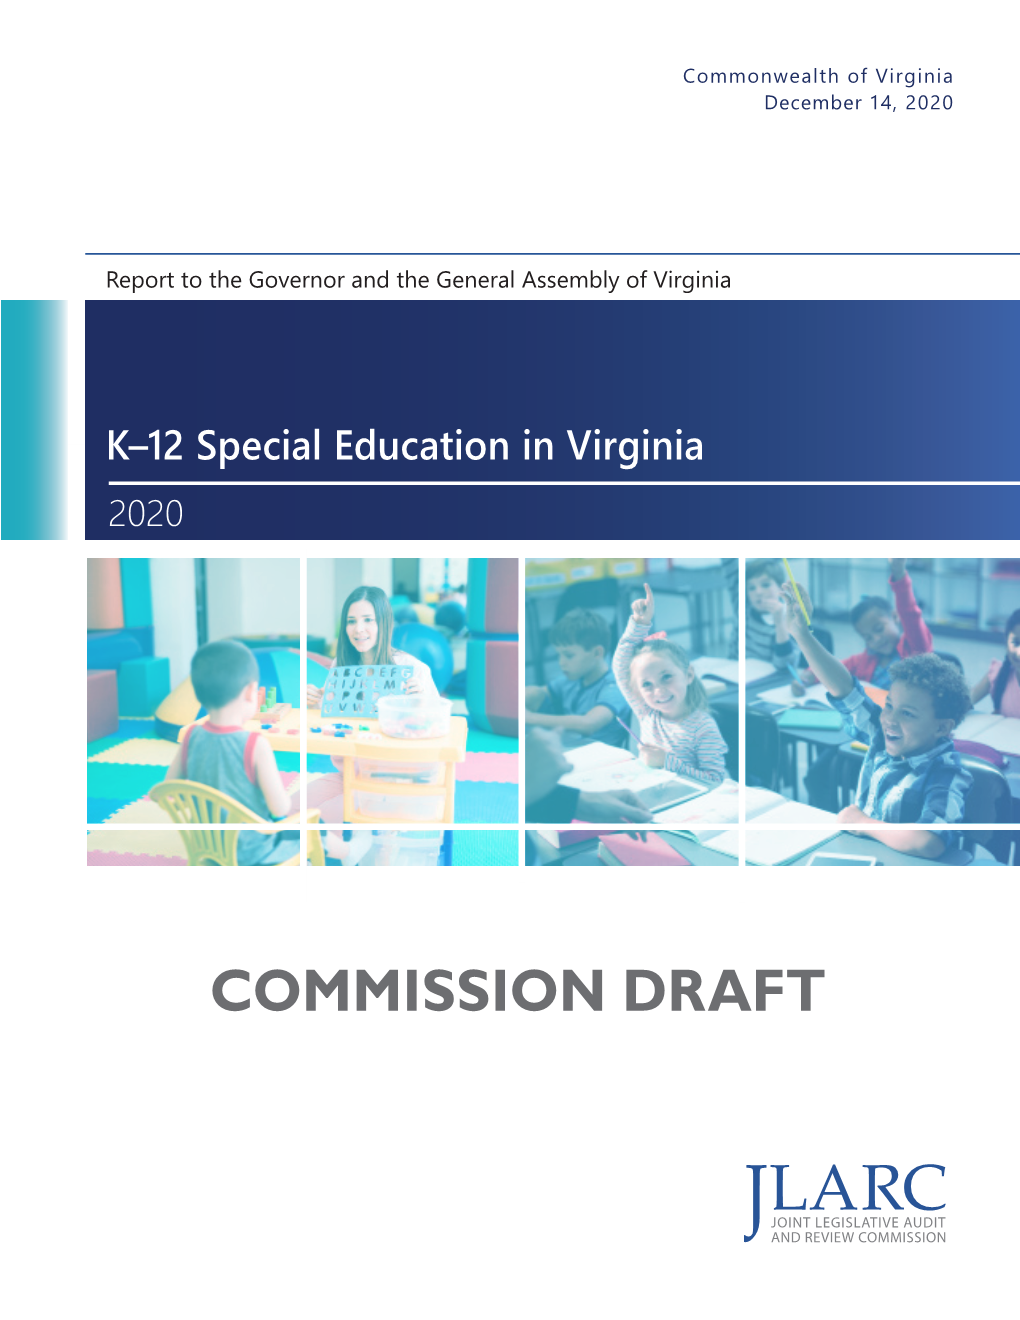 K-12 Special Education in Virginia and Thanks Your Team for Their Diligence in This Important Review